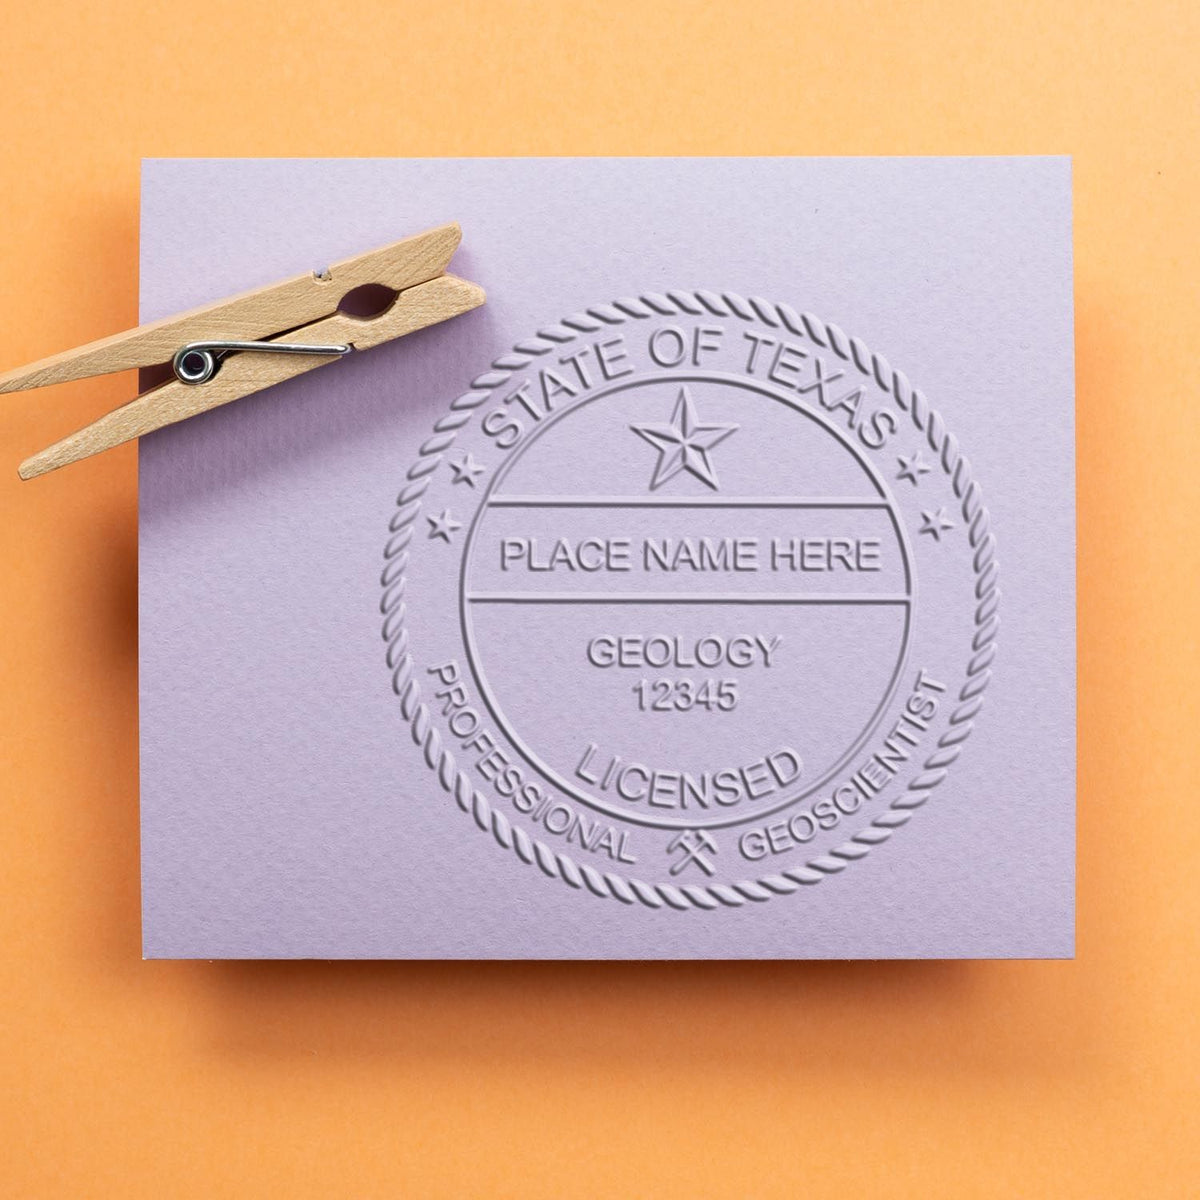 An in use photo of the Gift Texas Geologist Seal showing a sample imprint on a cardstock